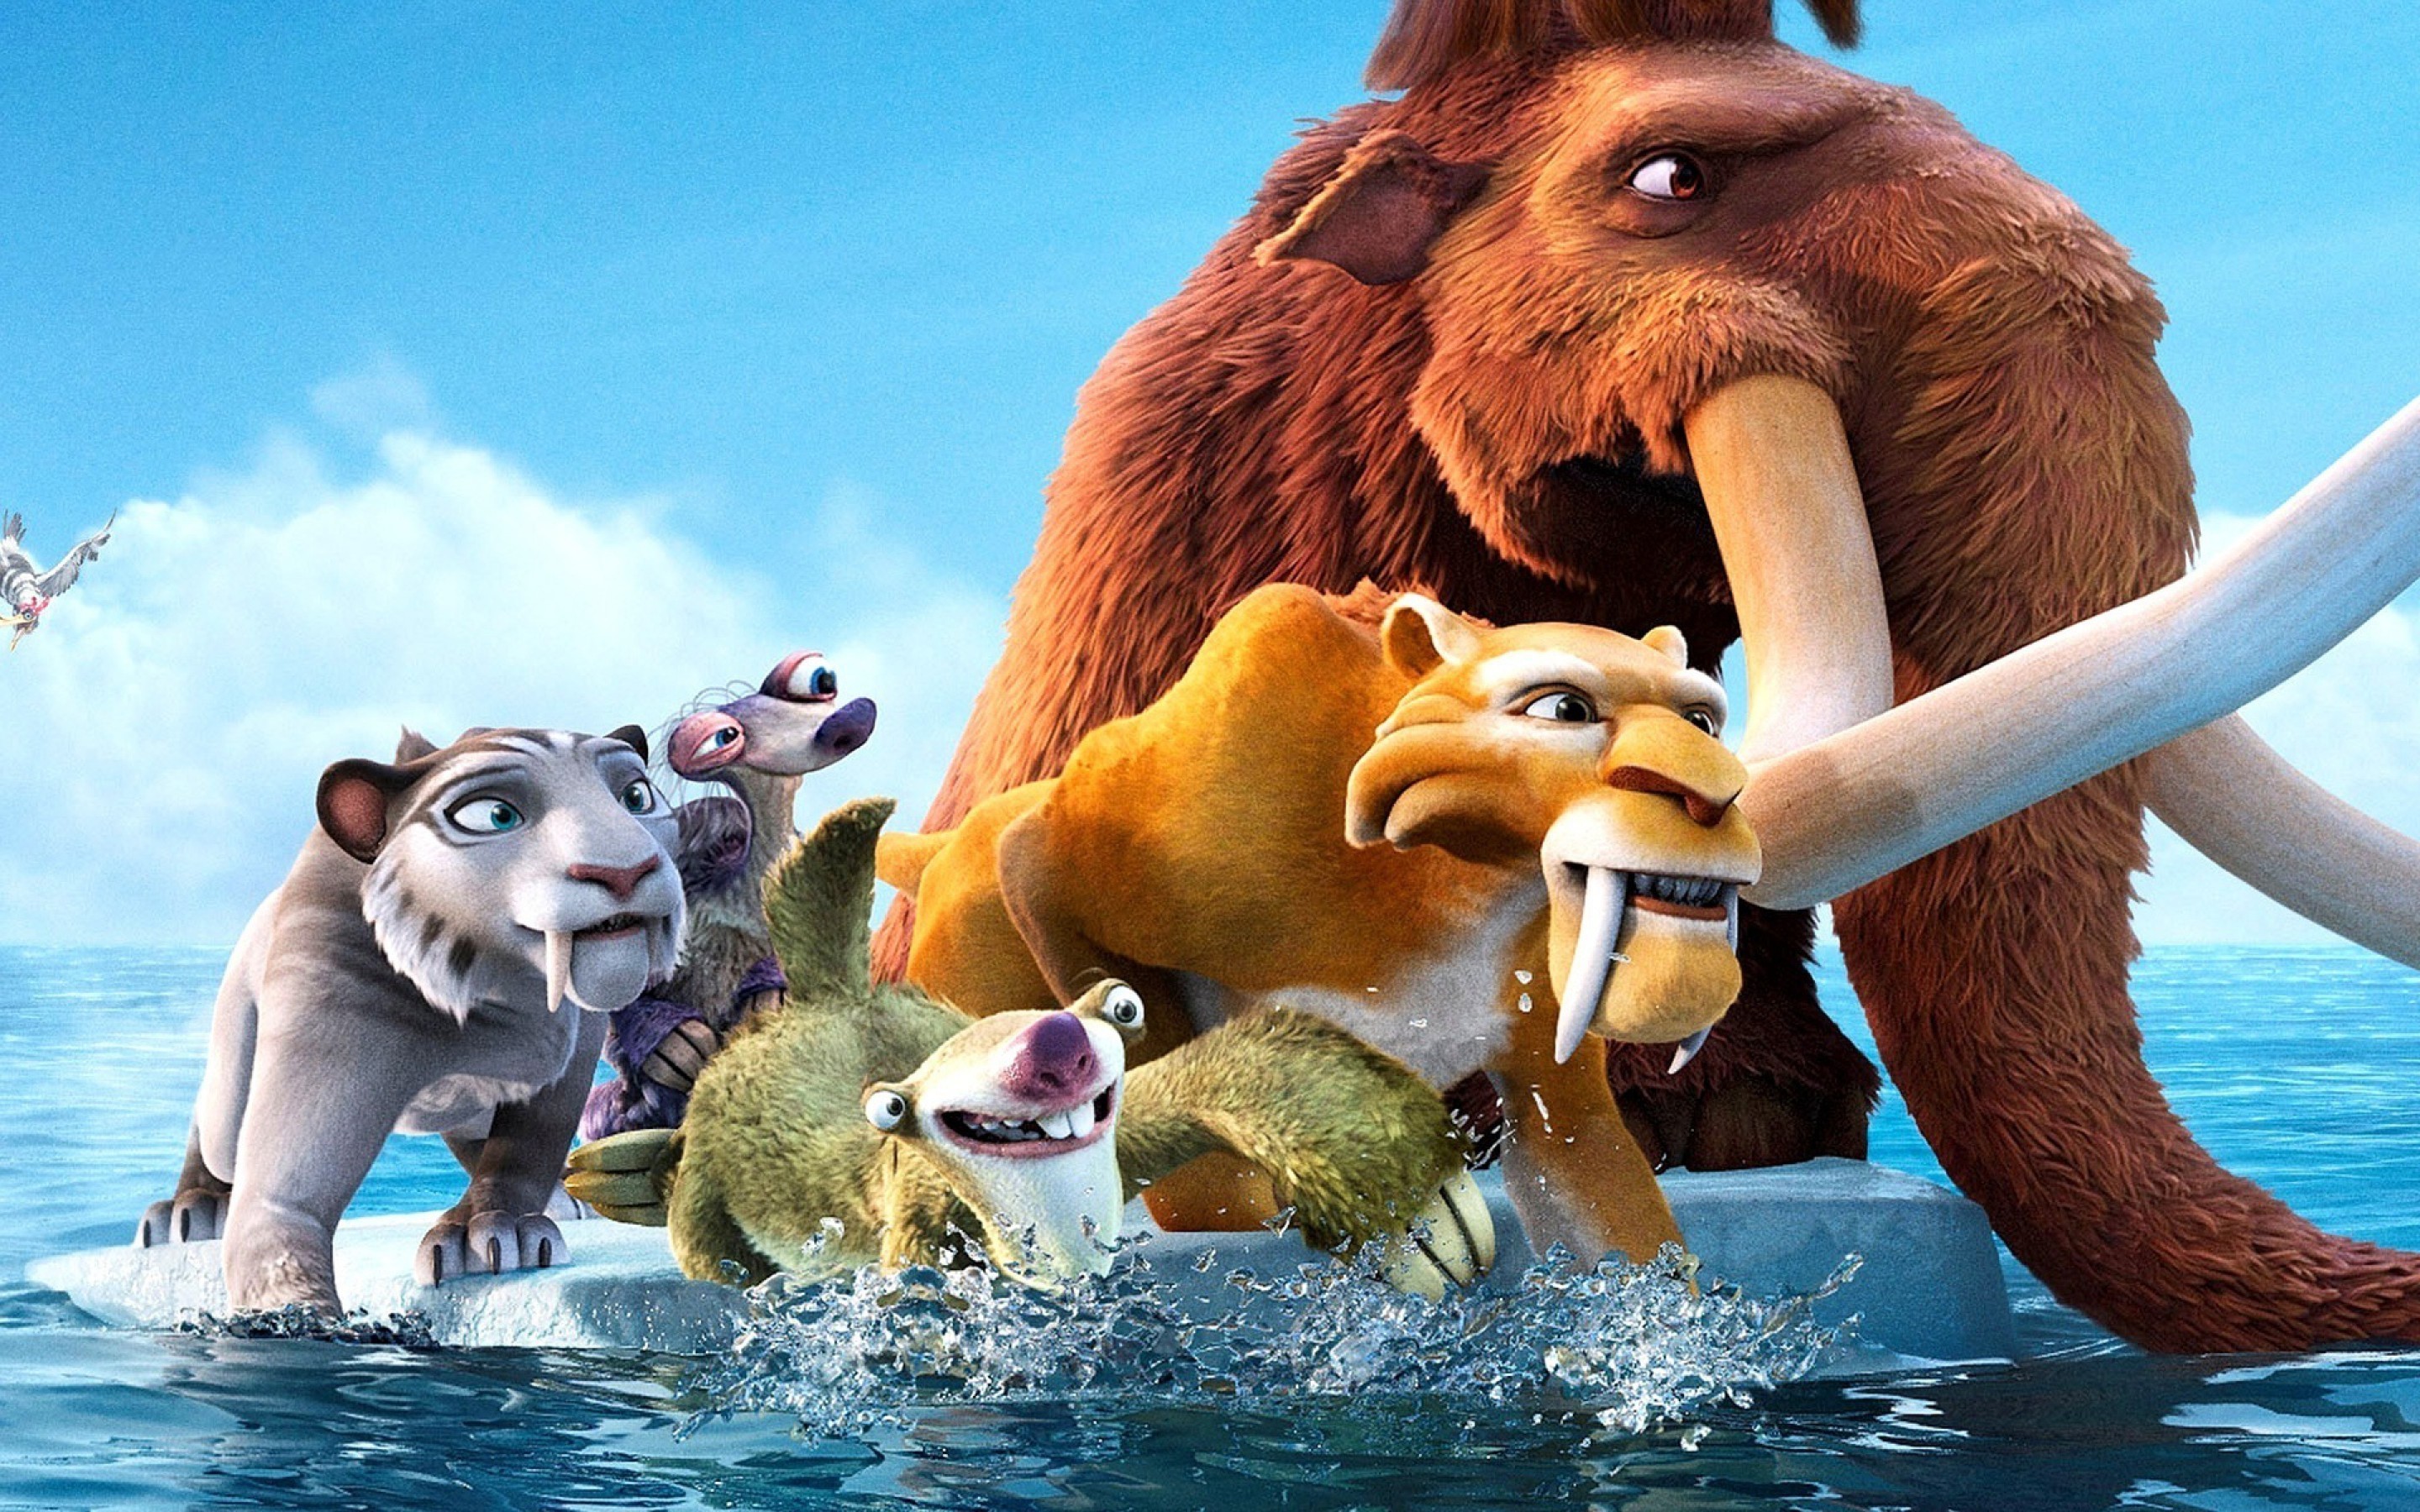 General 2880x1800 Ice Age: Continental Drift movies animated movies